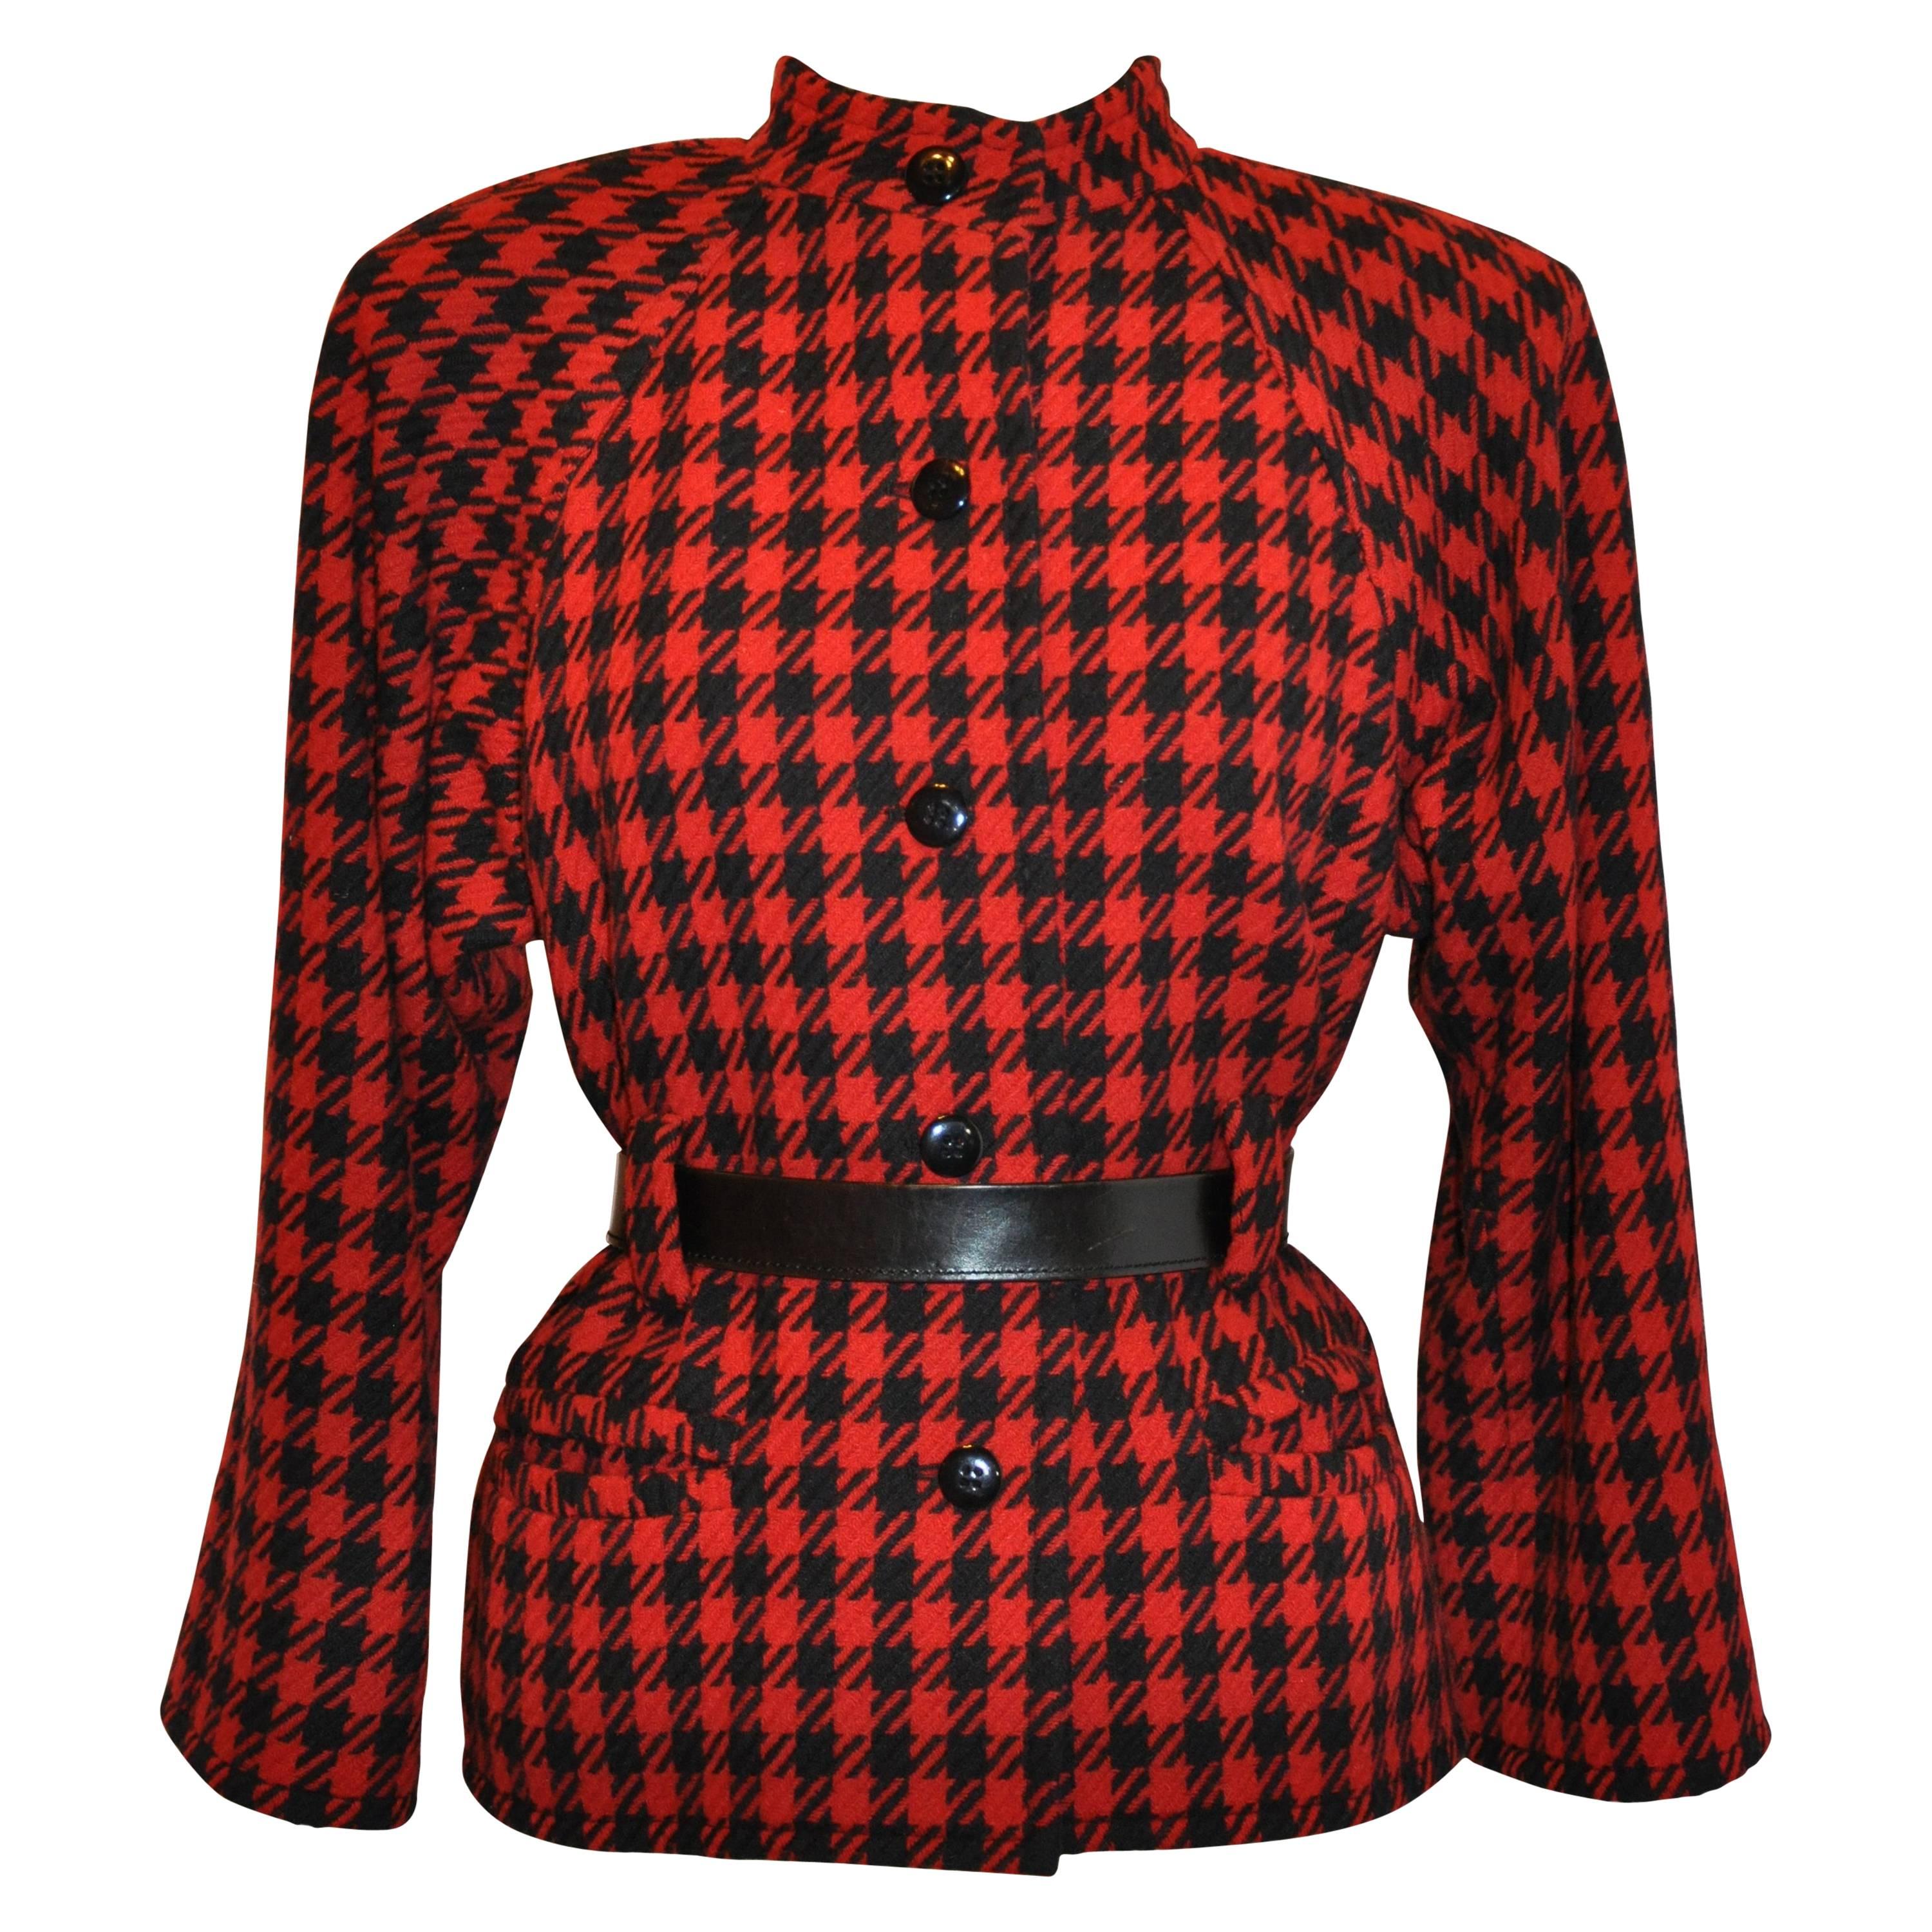 Yves Saint Laurent Black & Red Checkered Jacket For Sale